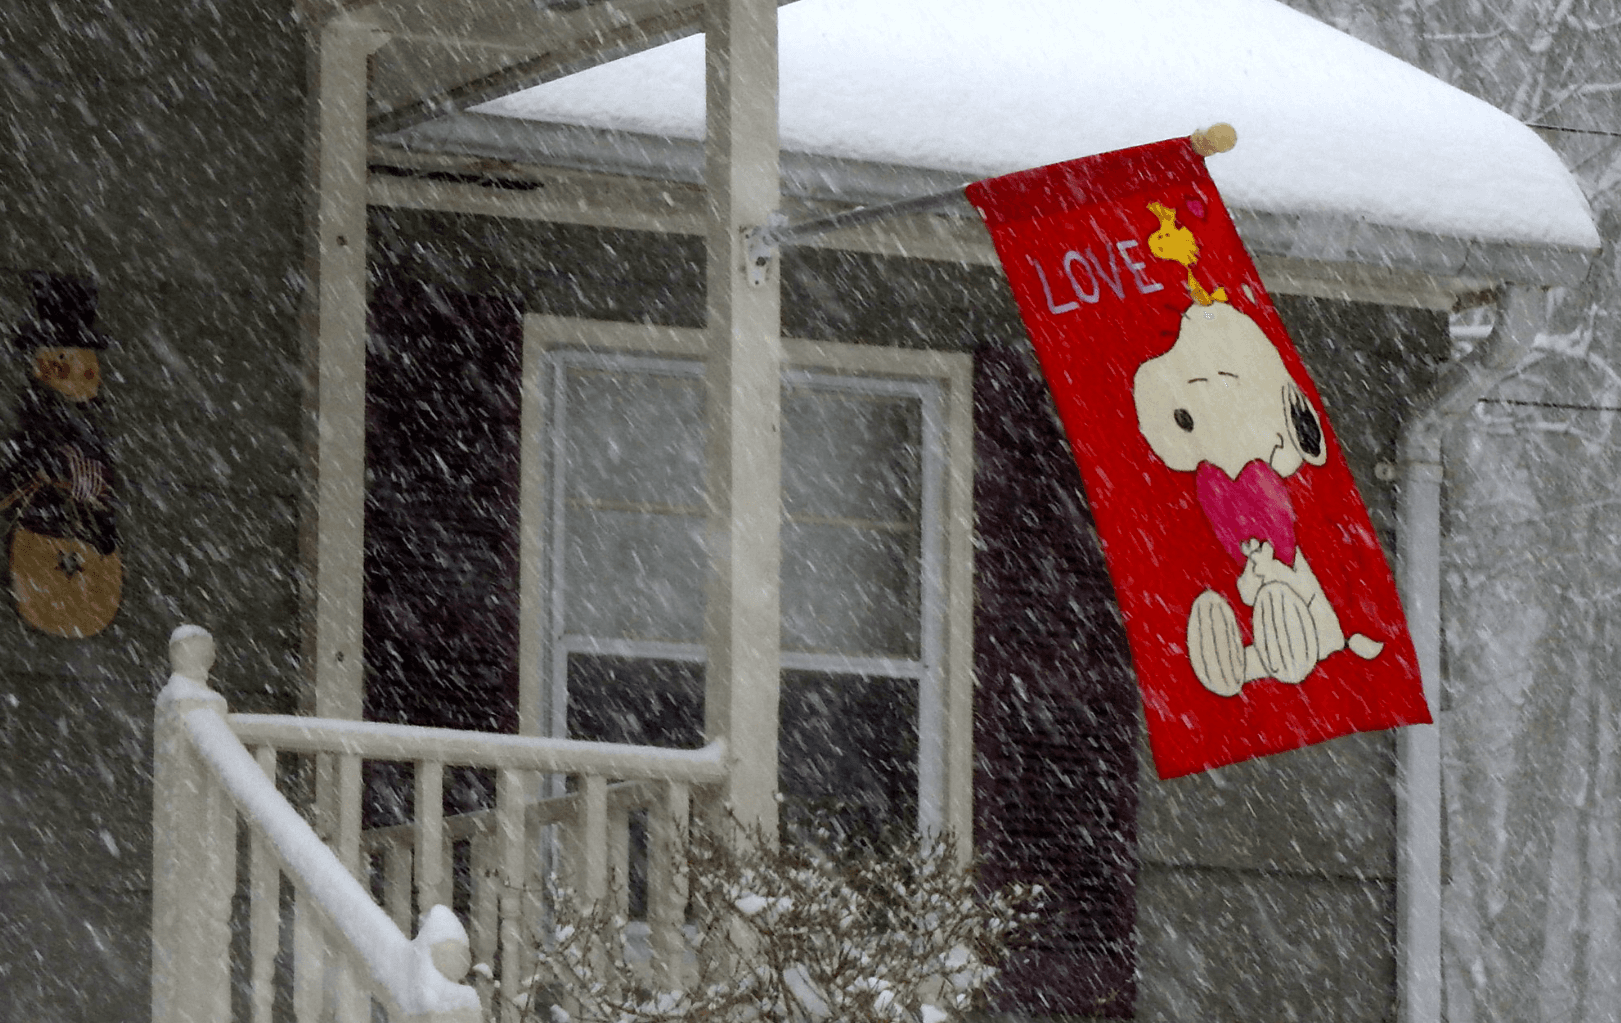 A cheerful banner with the Peanuts cartoon character Snoopy and the word "Love" sways from the porch of a house in a winter snow storm.